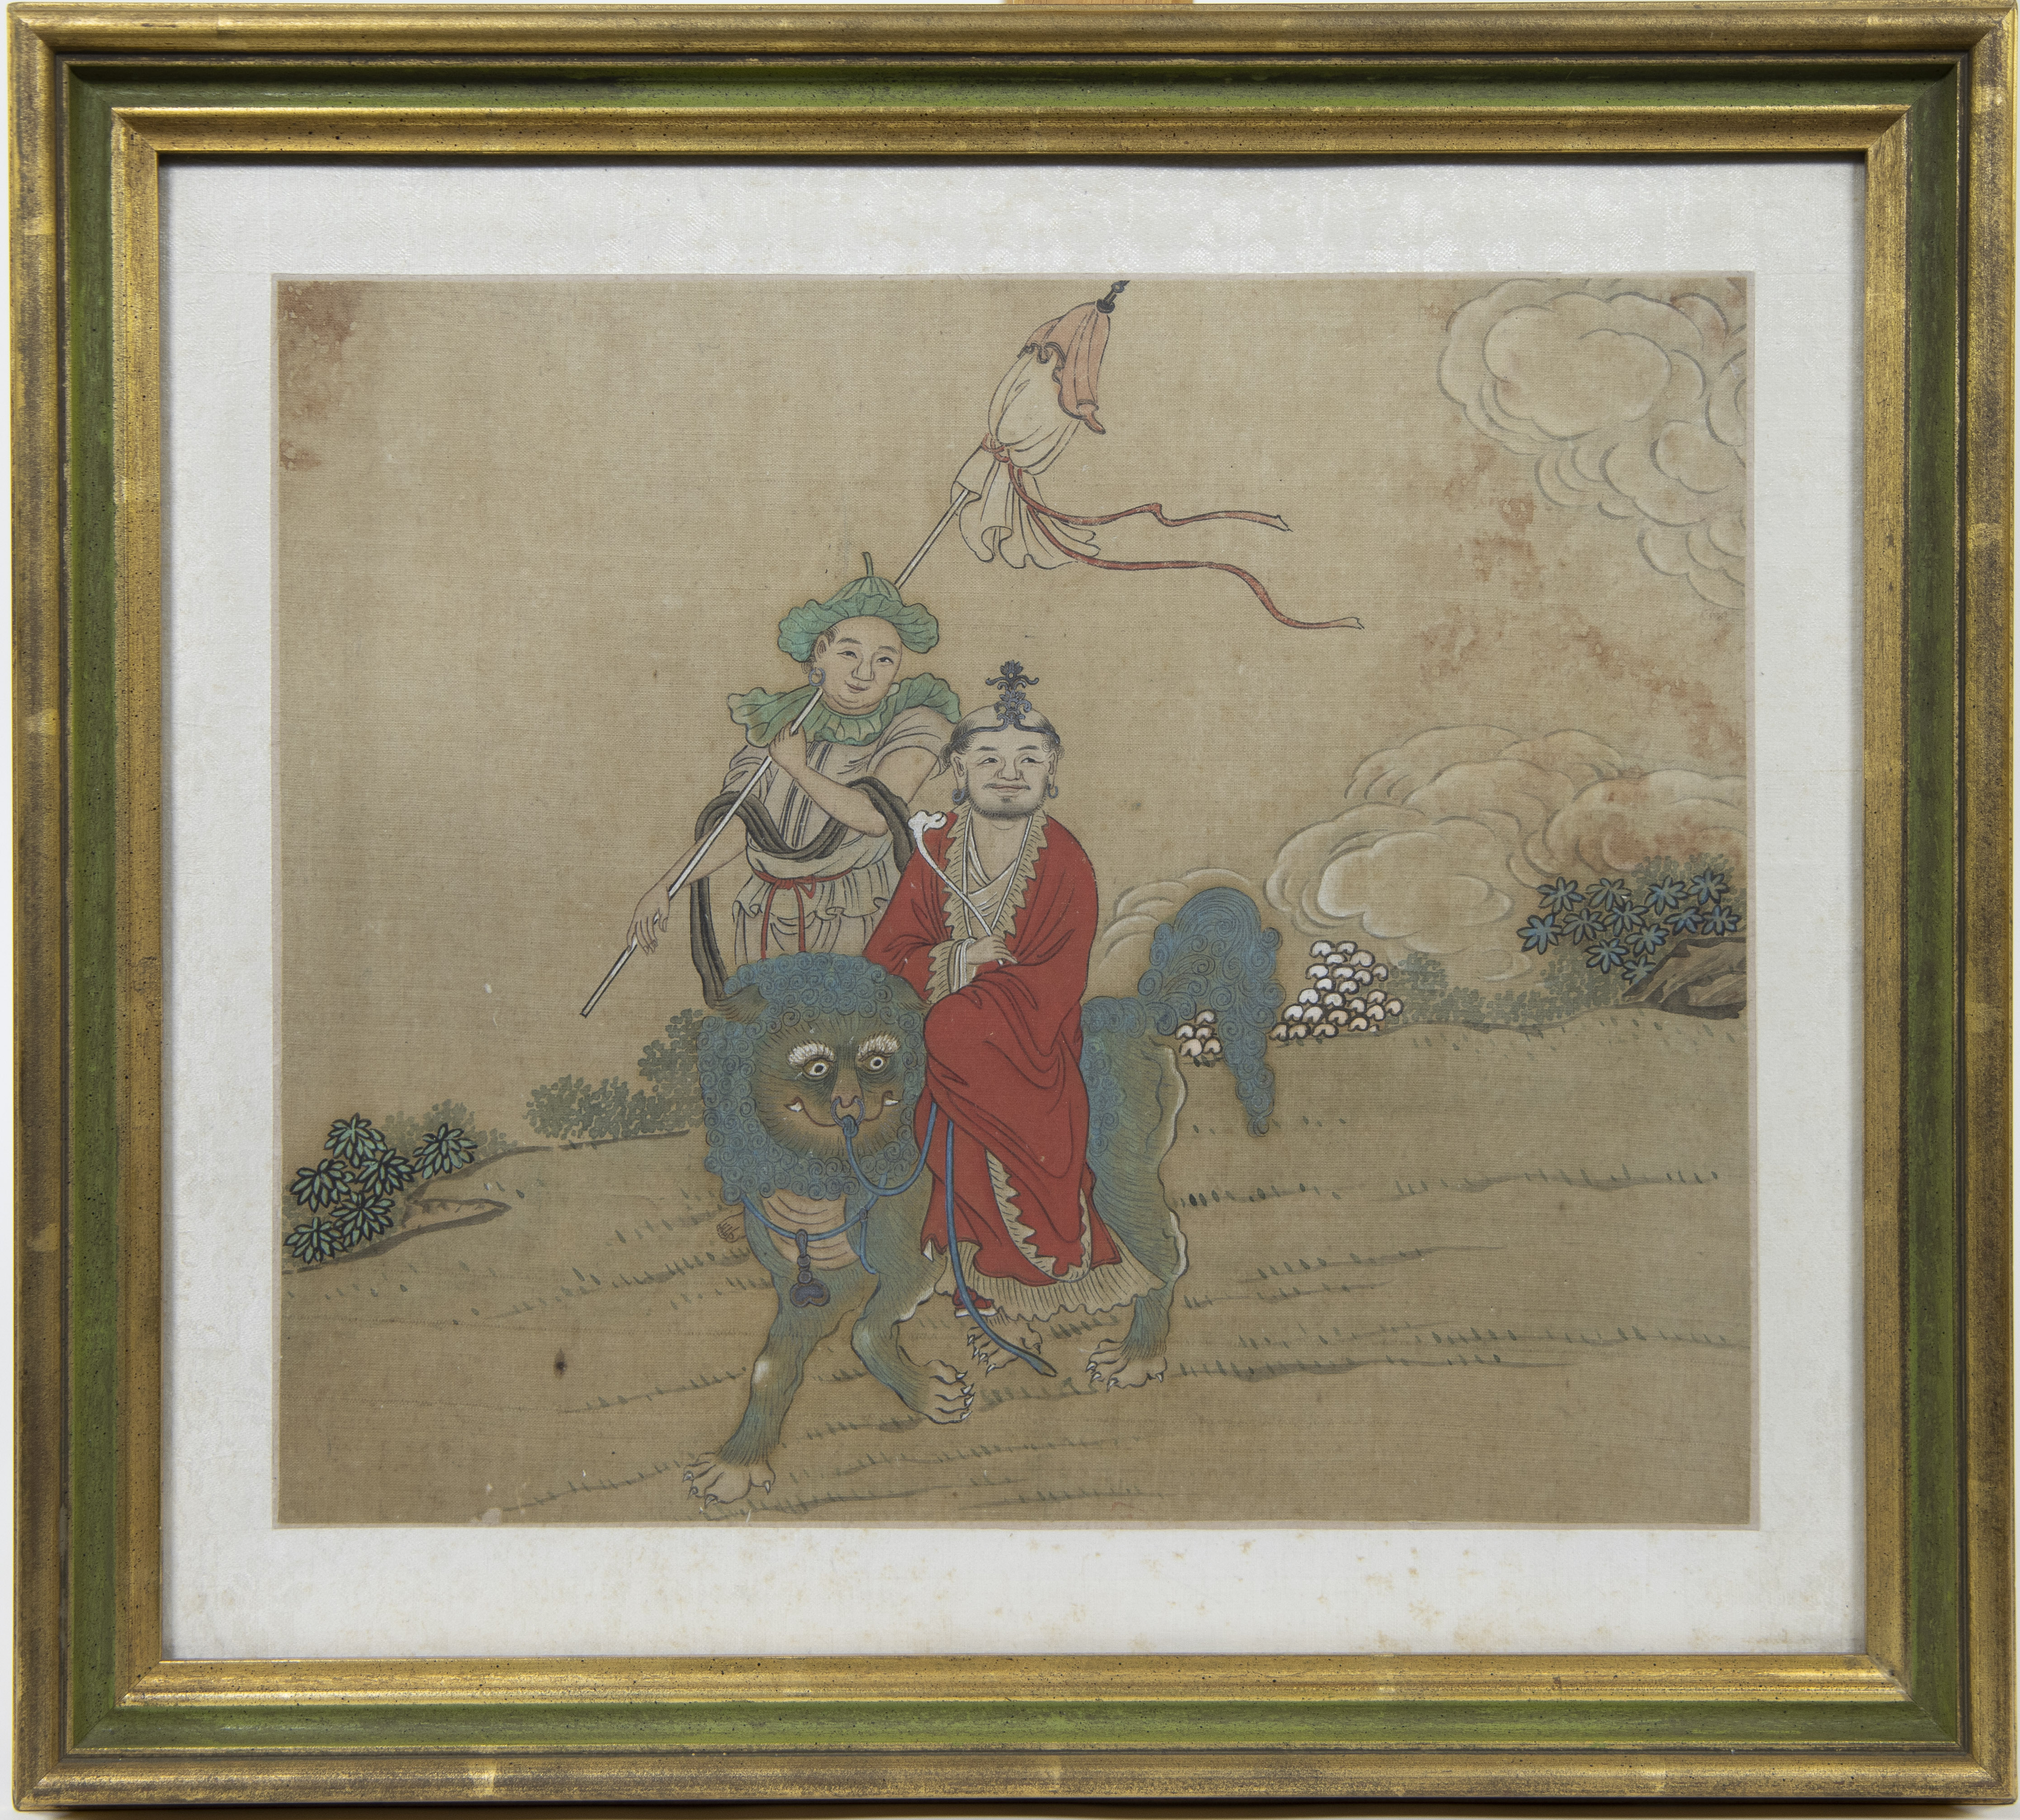 Set of 13 Chinese coloured drawings on silk, 19th century, some are signed - Image 2 of 17